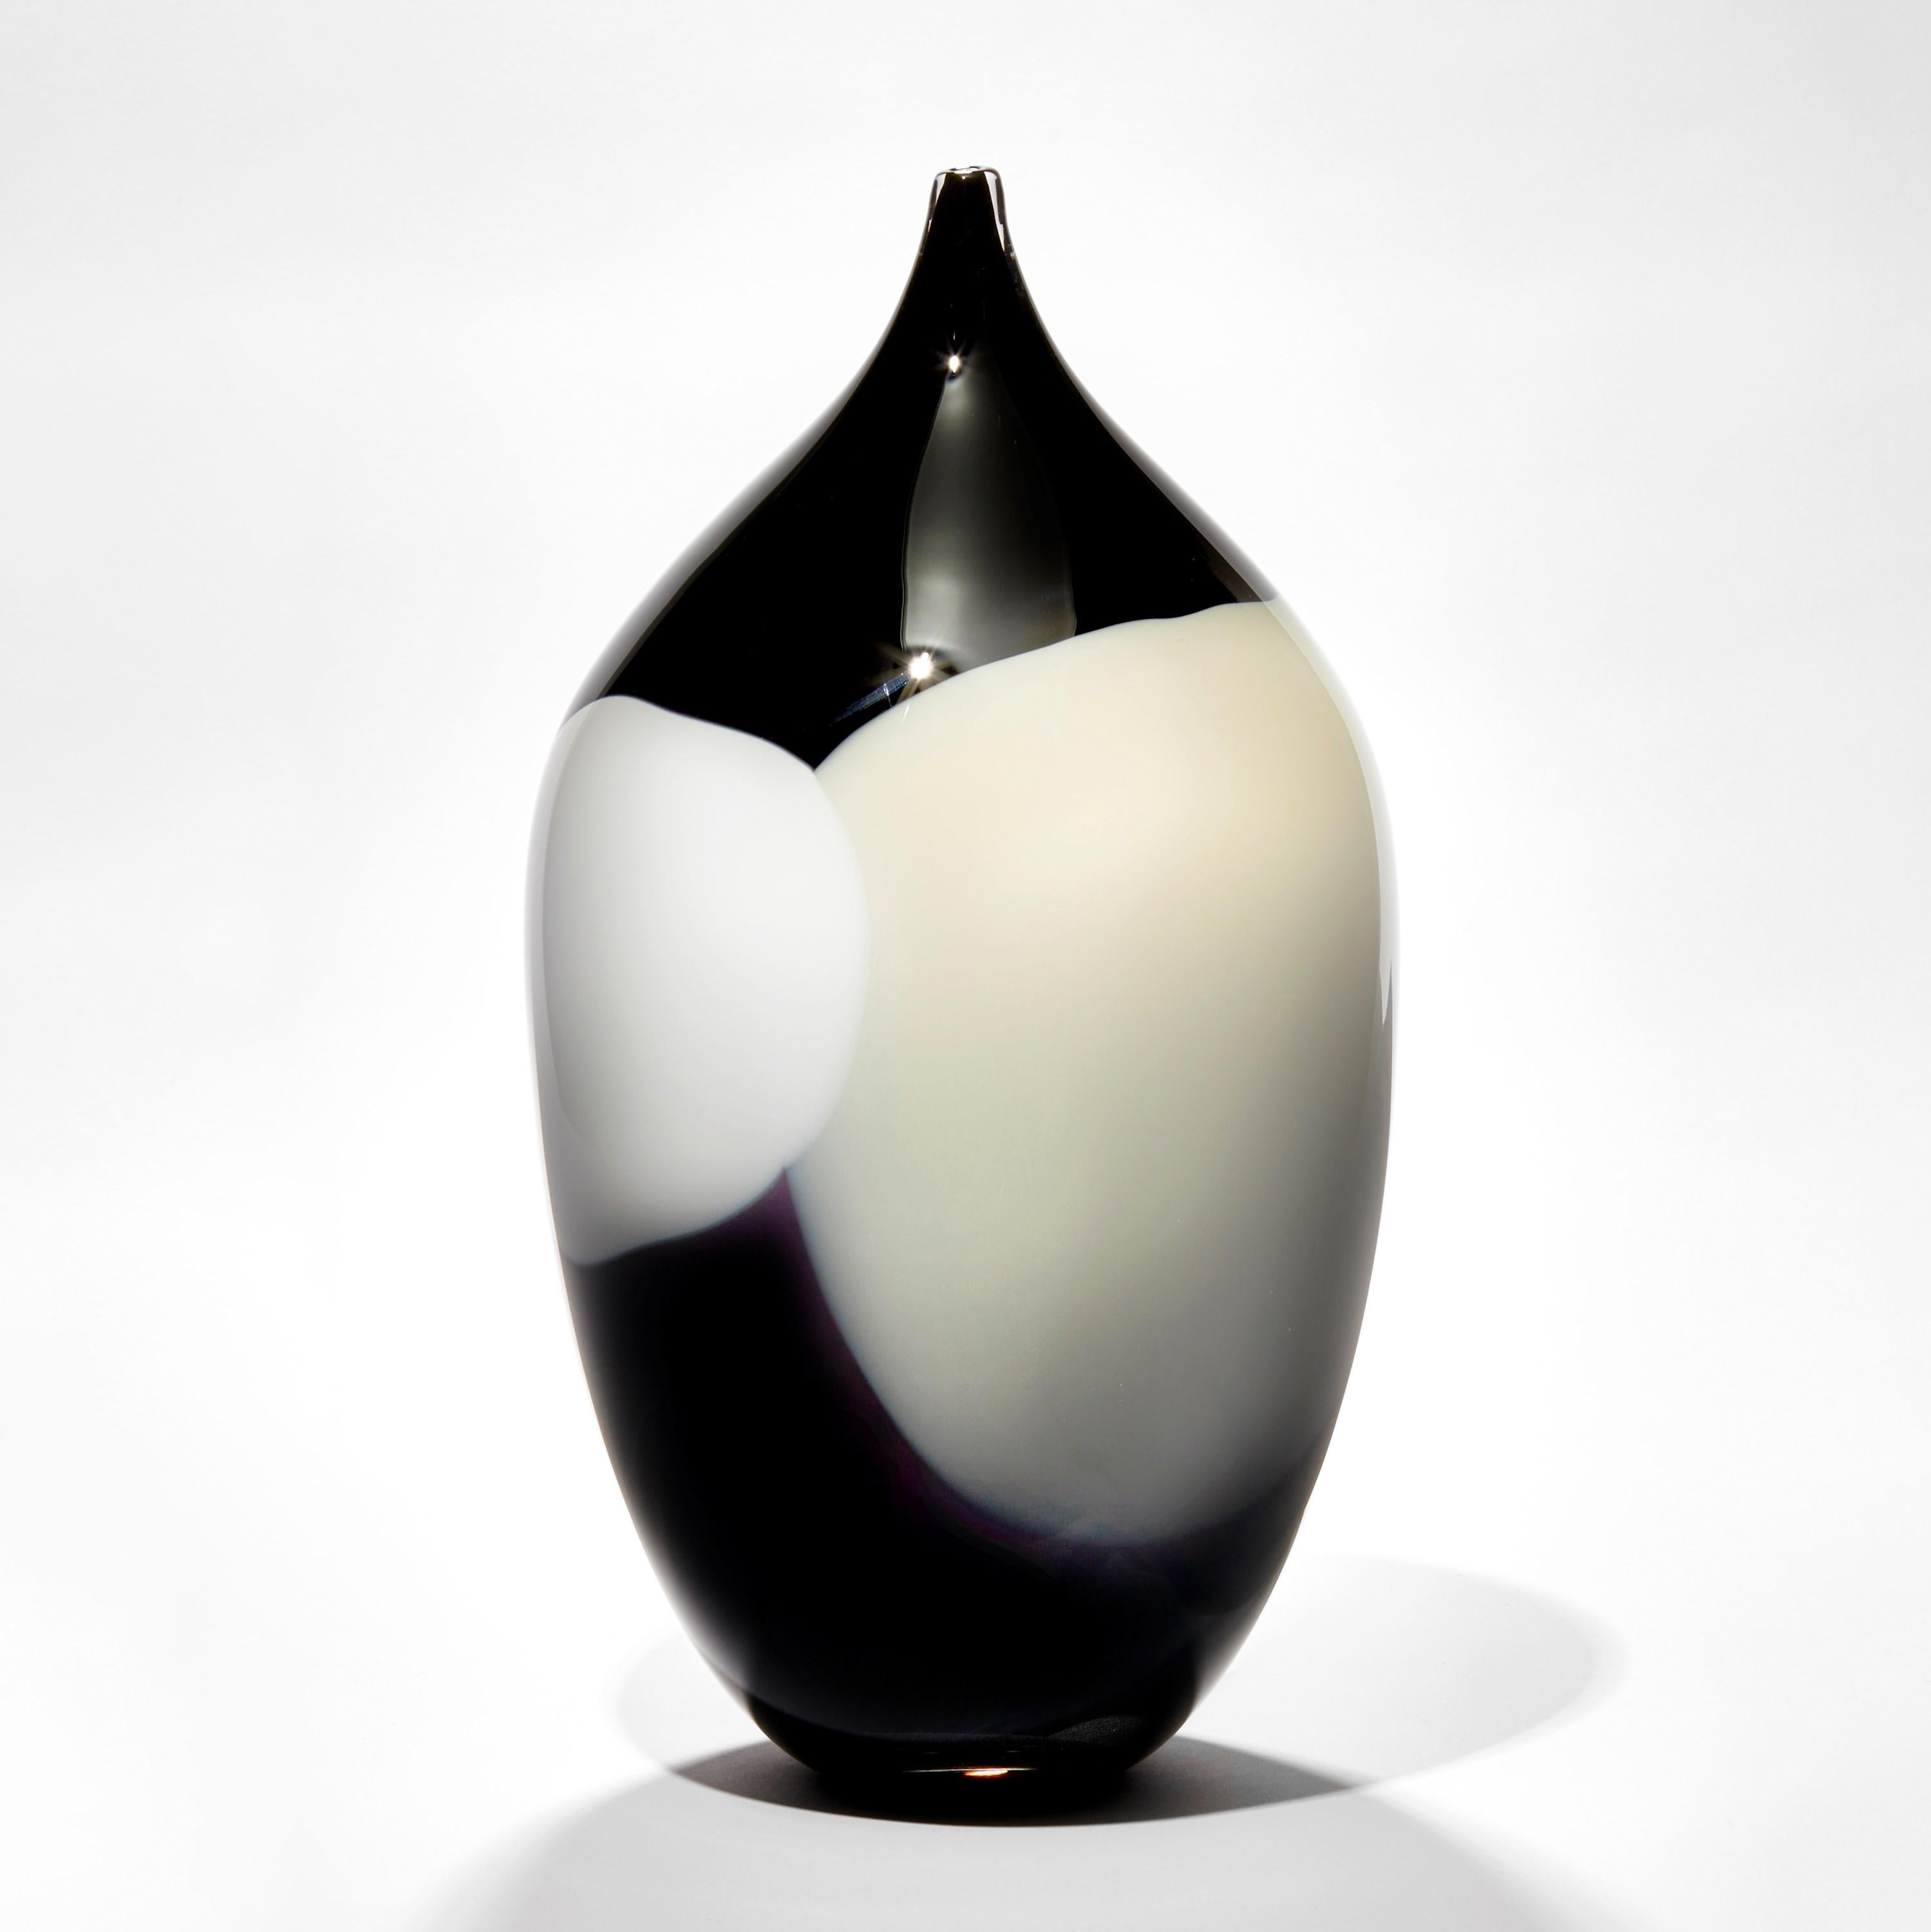 'Nocturne' is a unique glass sculptural vessel by the Swedish artist, Gunnel Sahlin.

Sahlin’s current passions include exploring the limits of glass materiality, colour, form and light taking her inspiration from the natural world around her.